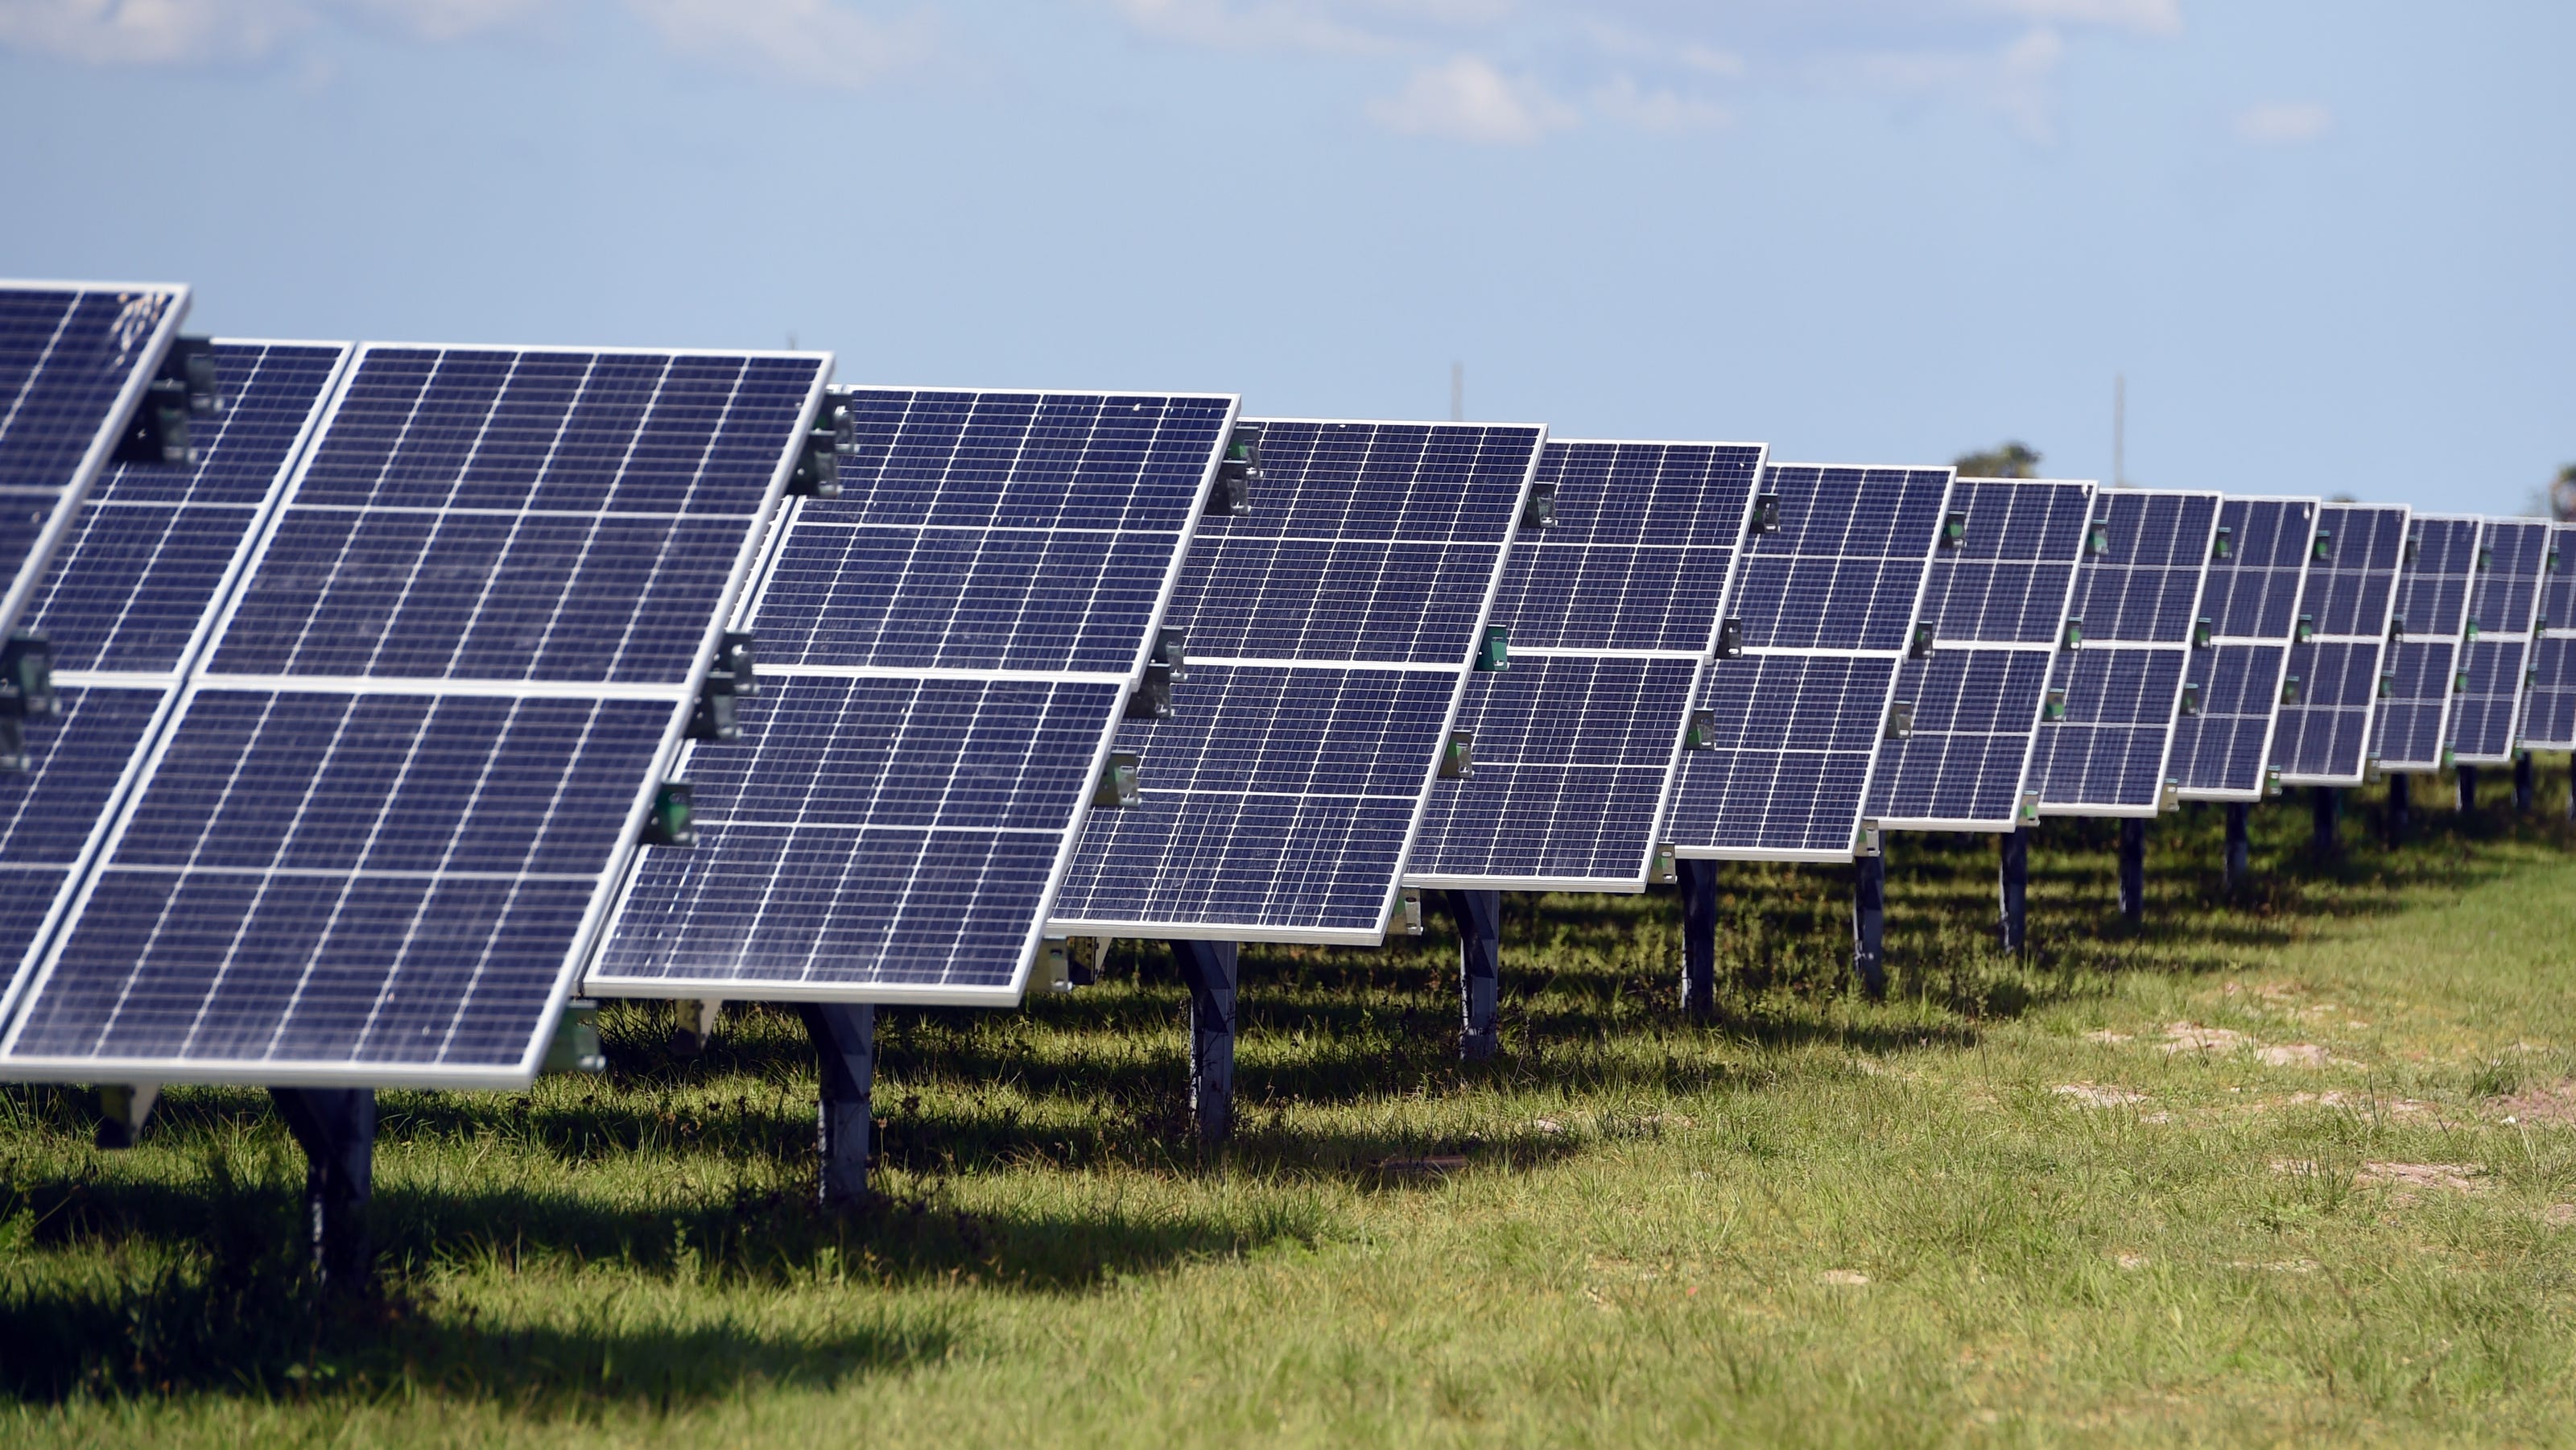 fpl-solar-plants-third-one-coming-to-martin-after-coal-plant-closure